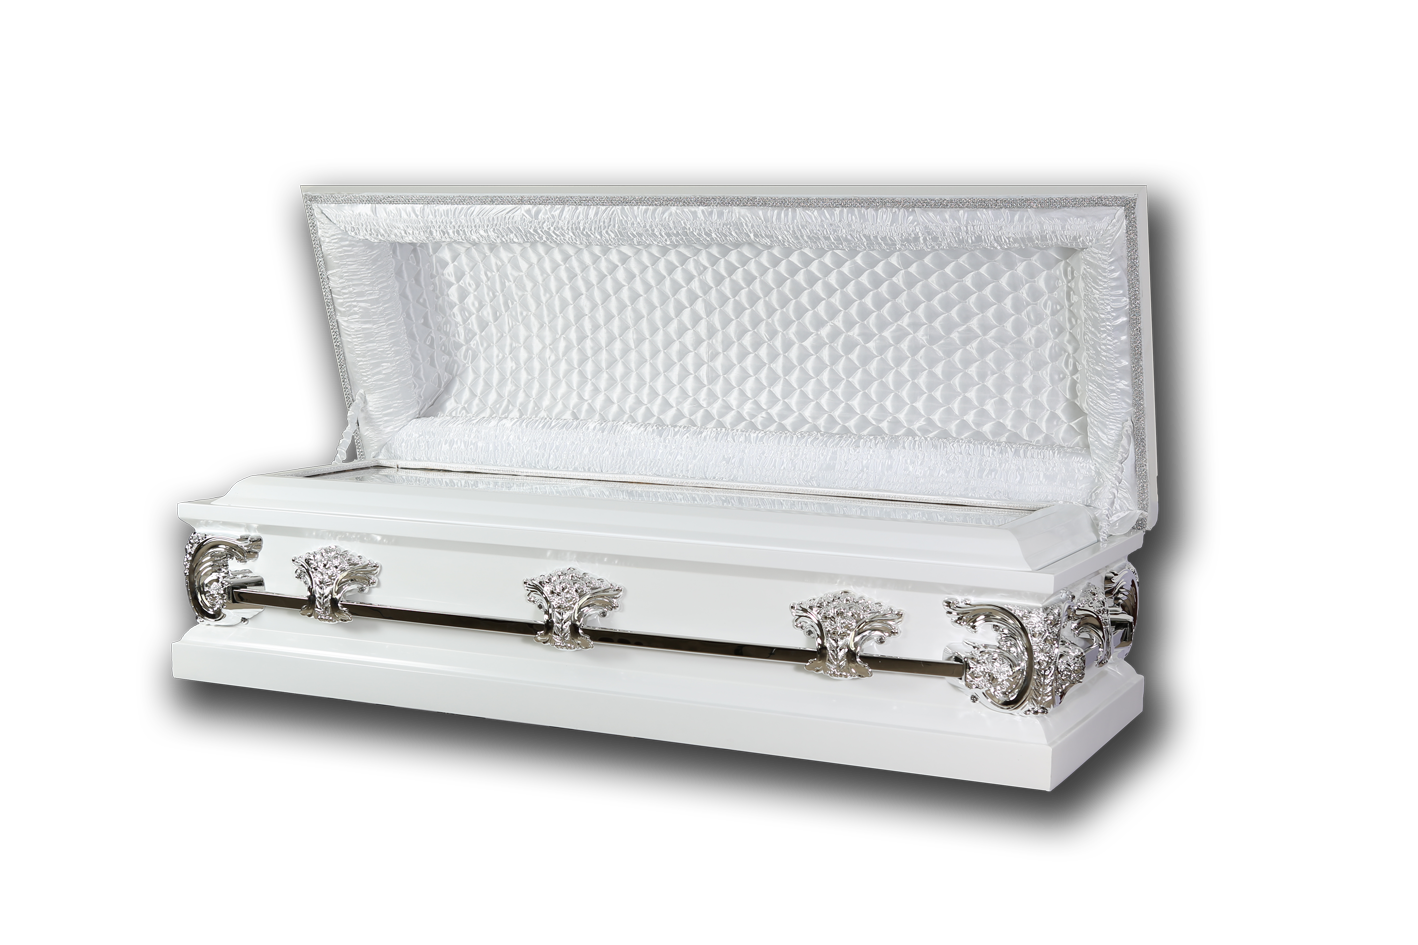  Included casket from ST. BERNADETTE traditional pre-need plan from St Peter Life plan